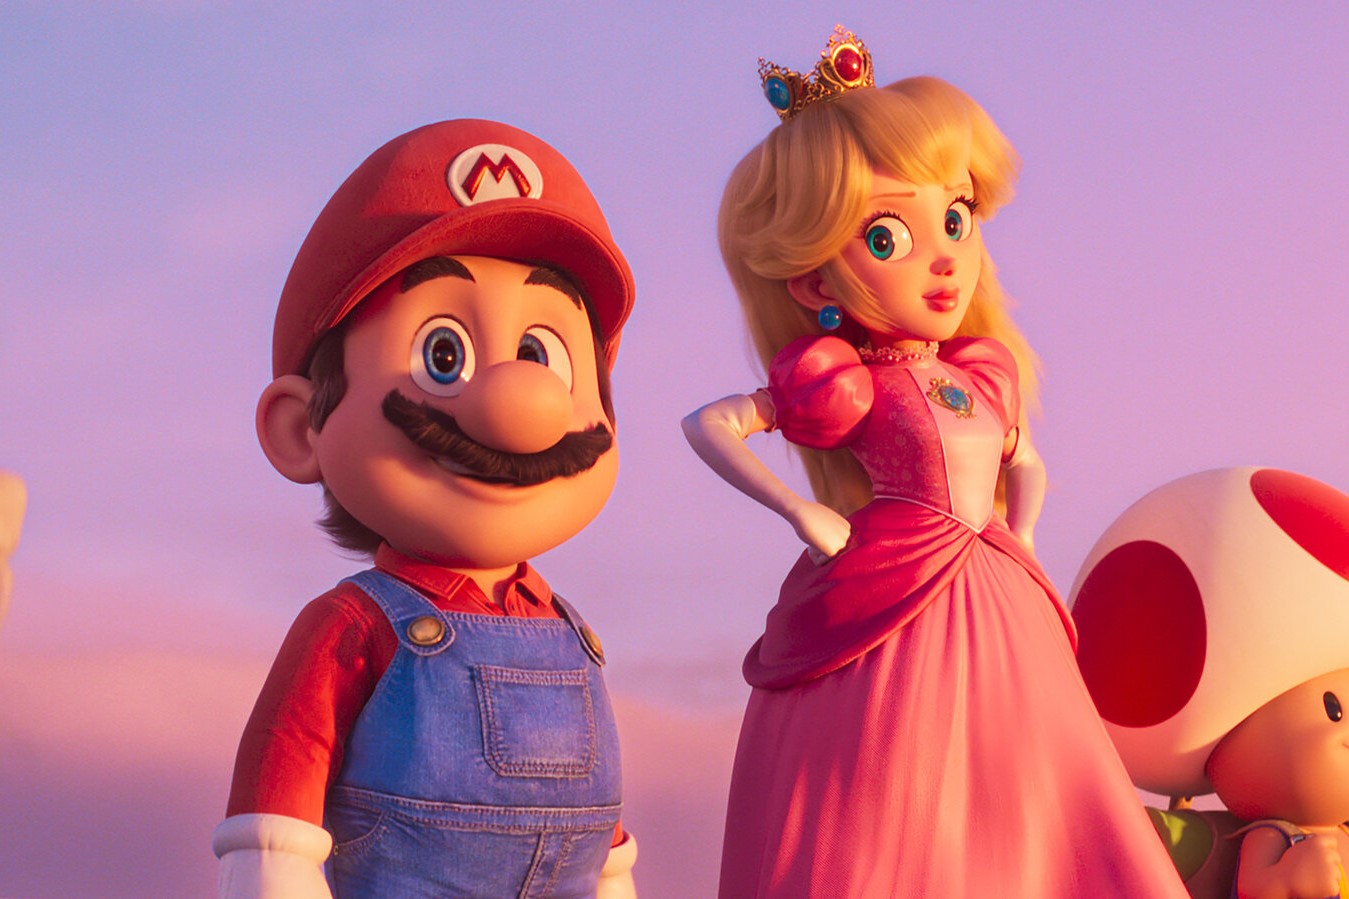 Princess Daisy’s Age In The Mario Universe Revealed!